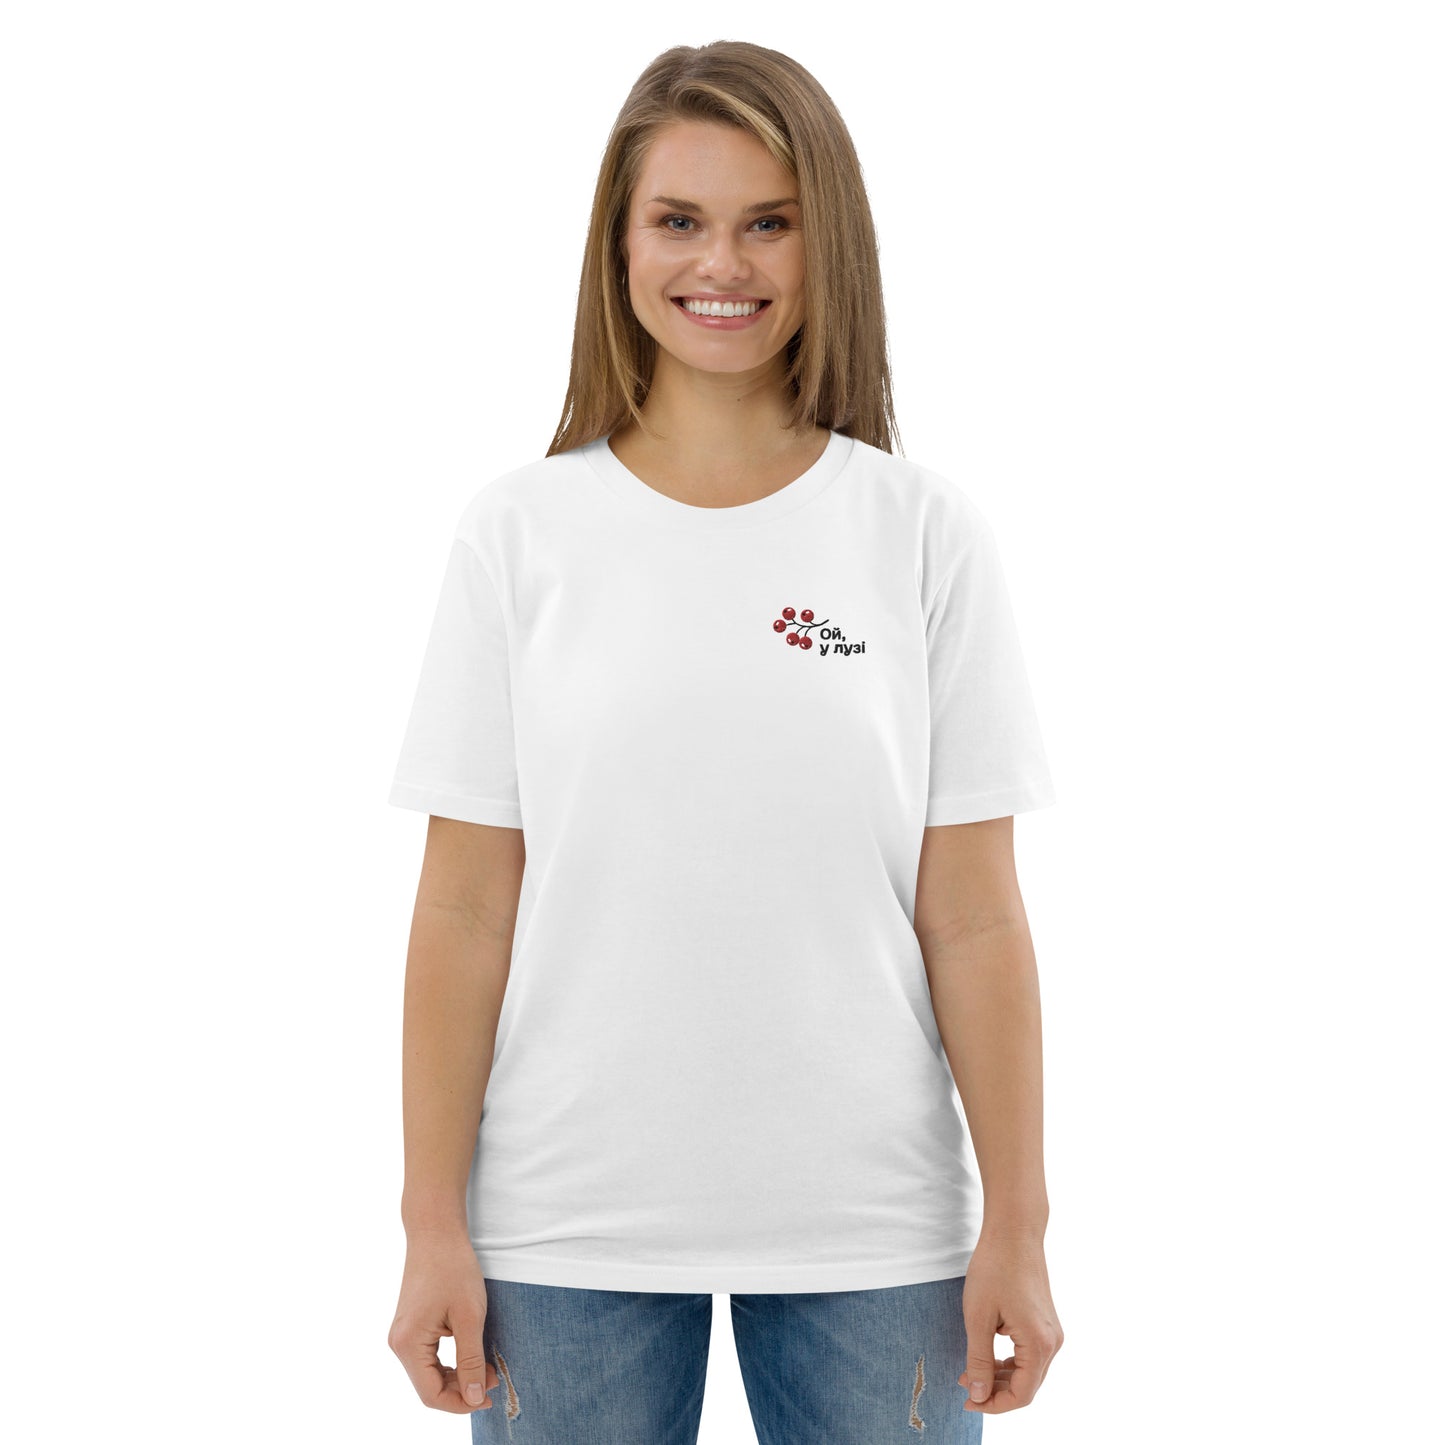 U luzi Unisex organic cotton t-shirt with embroidery in white